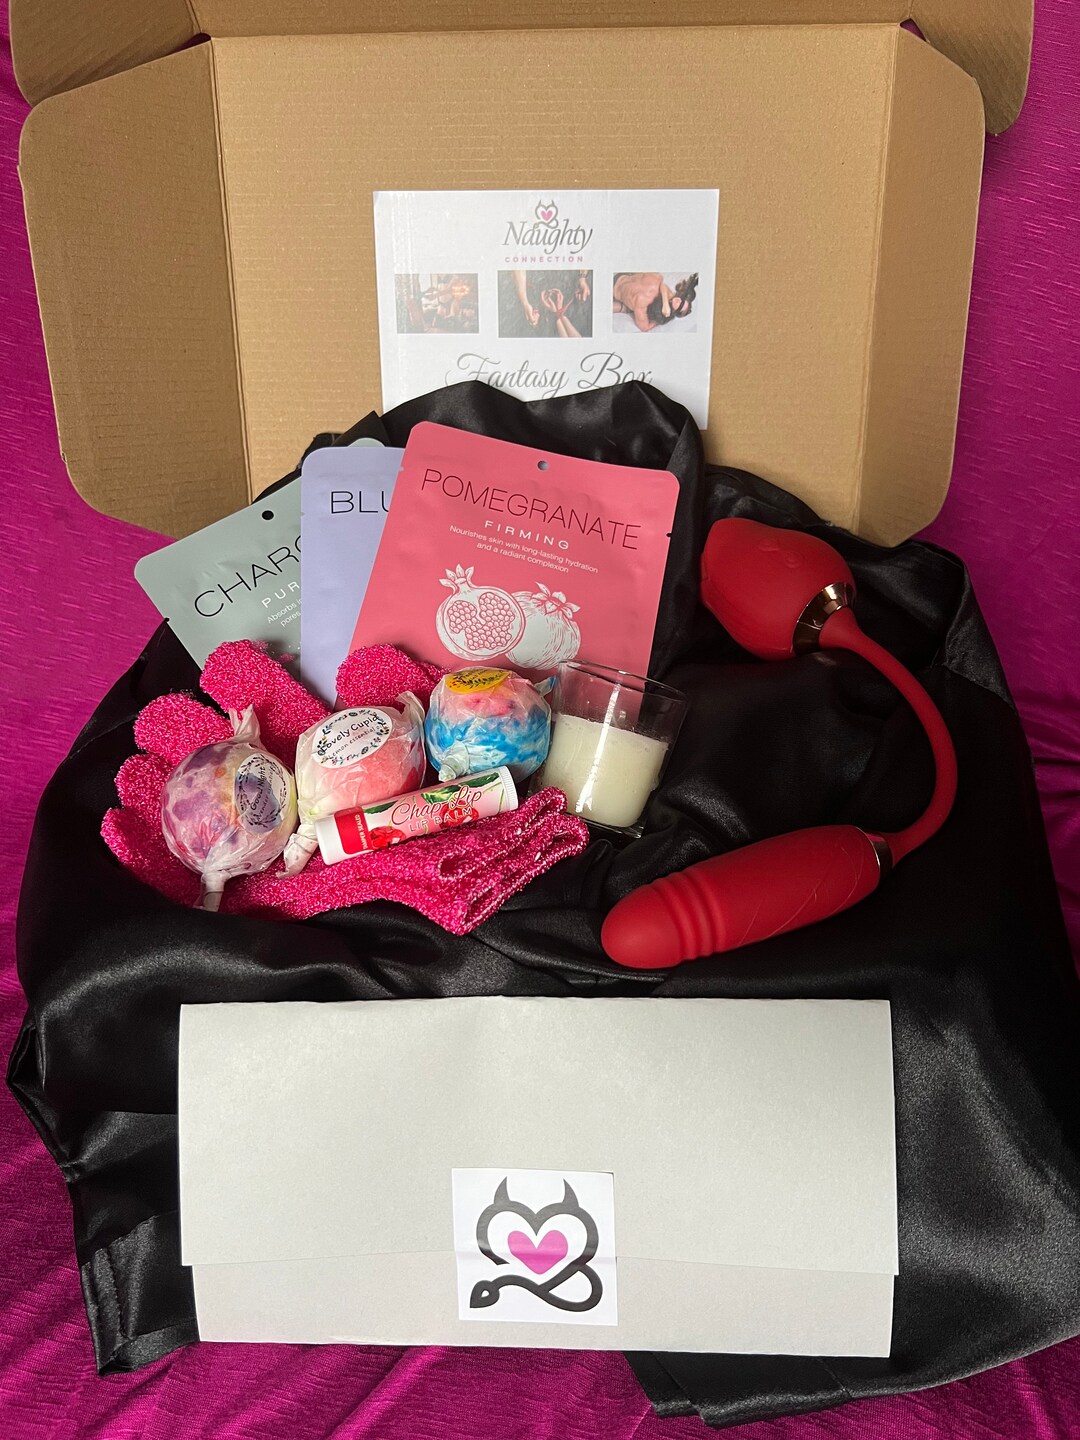 Naughty Connection Self Love Box With Rose Vibrator - Etsy